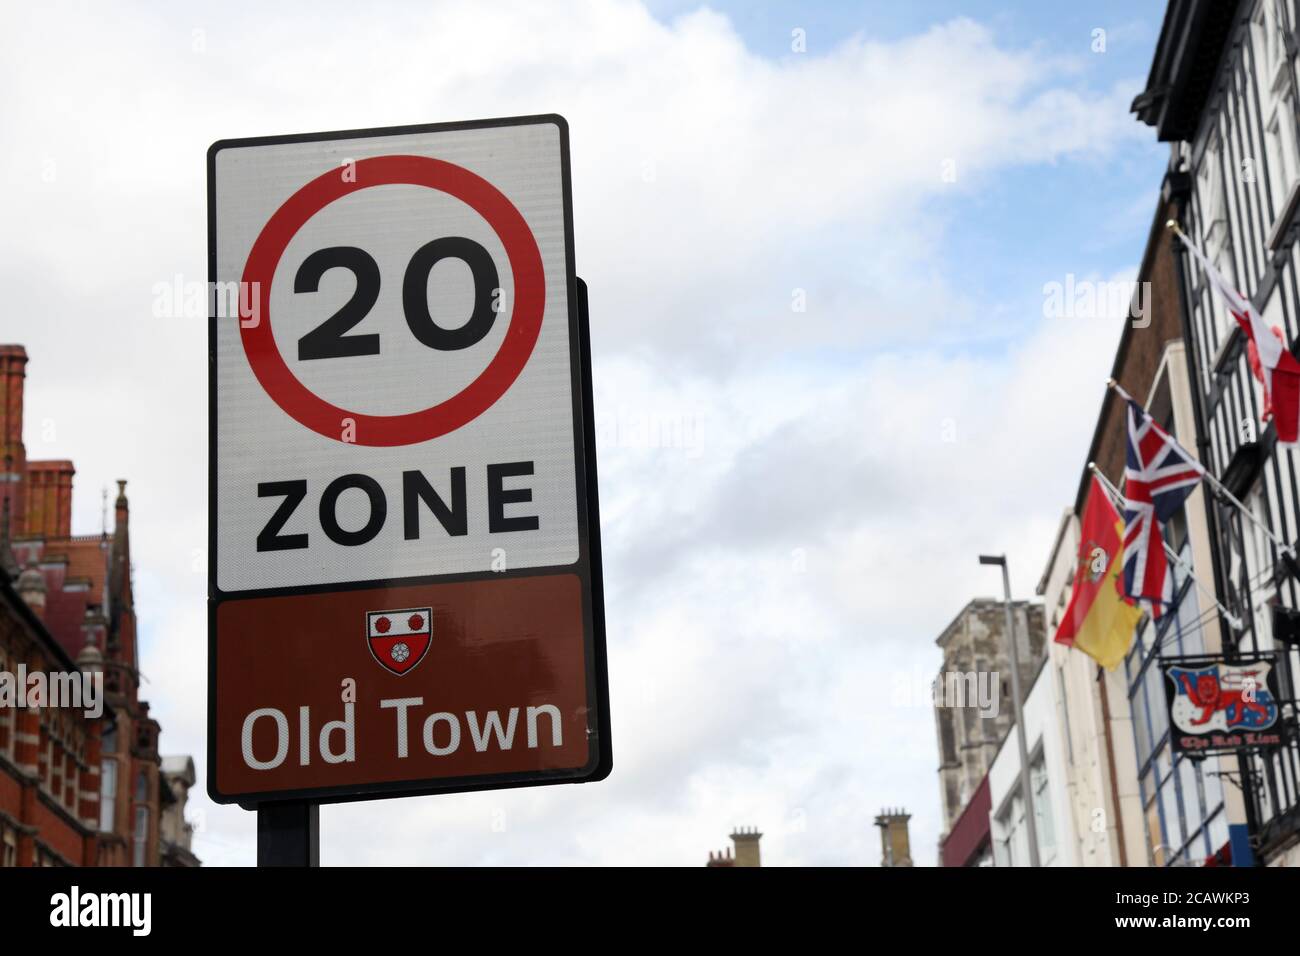 20 mph zone sign, entering Old Town, High Street, Southampton, England, UK, August 2020 Stock Photo